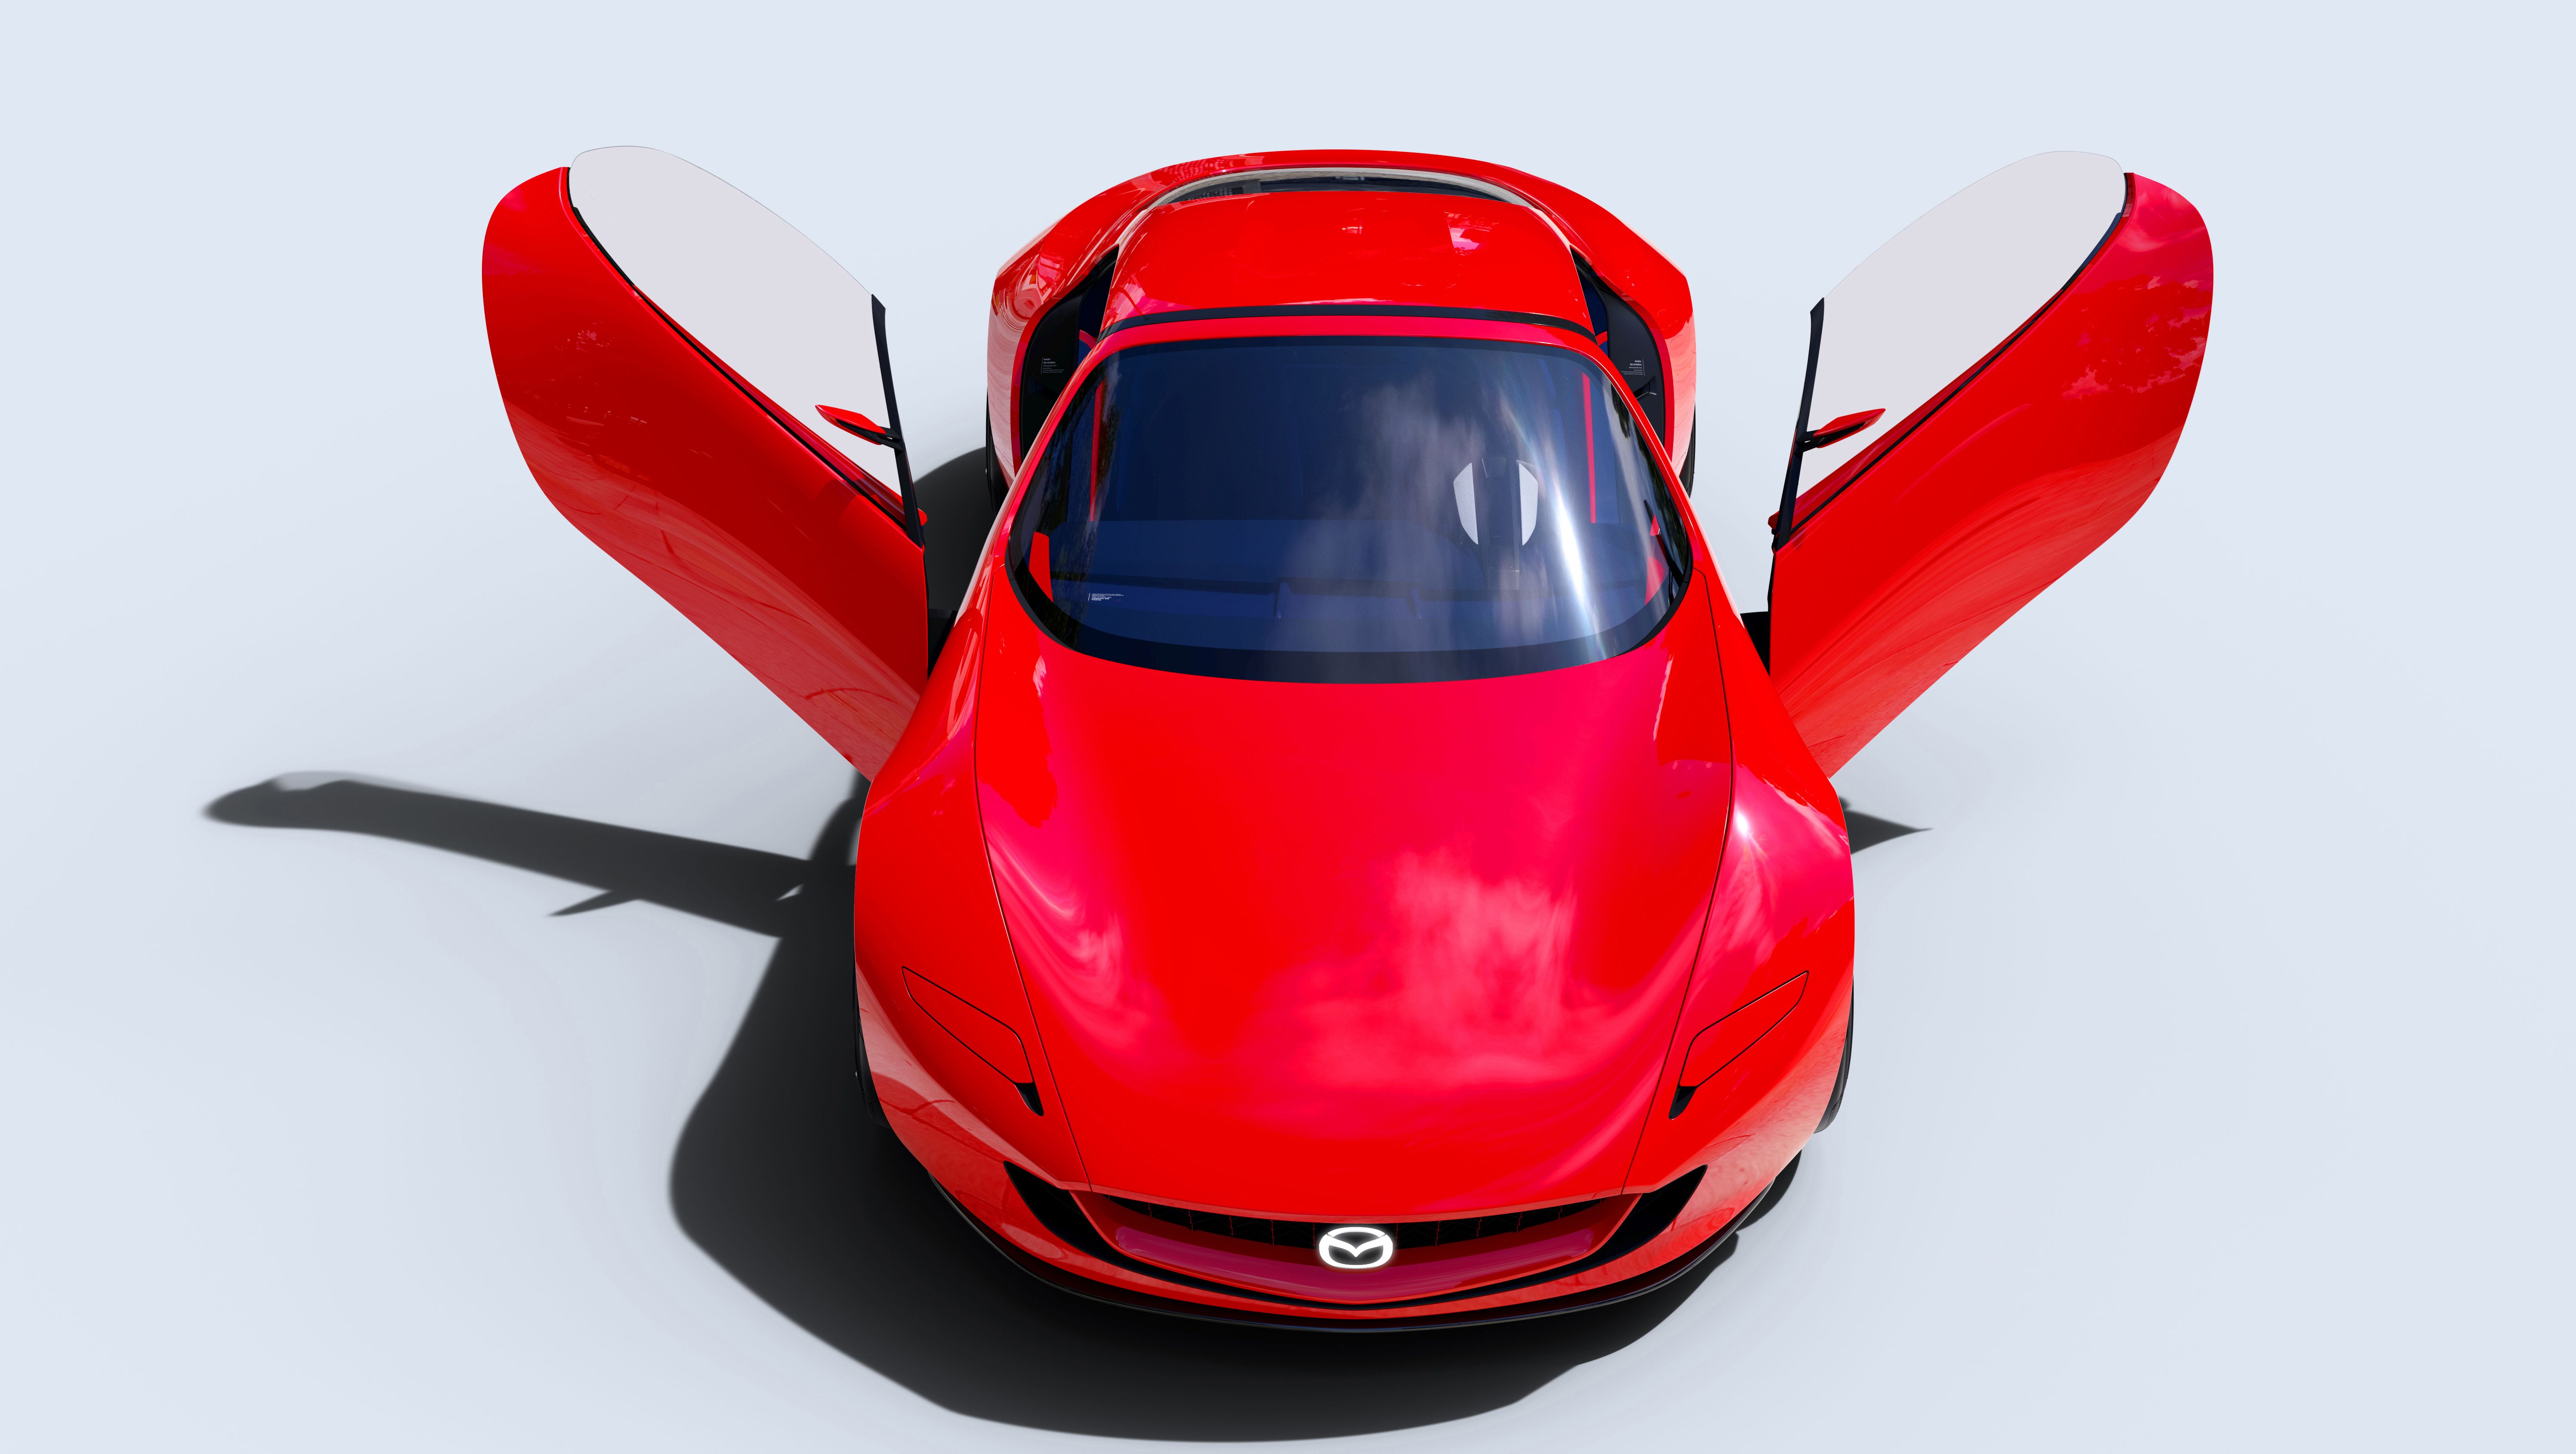 Wild sports car could become a reality: Mazda's eye-popping MX-5 and RX-7 rotary hybrid concept car could arrive by 2026 - report